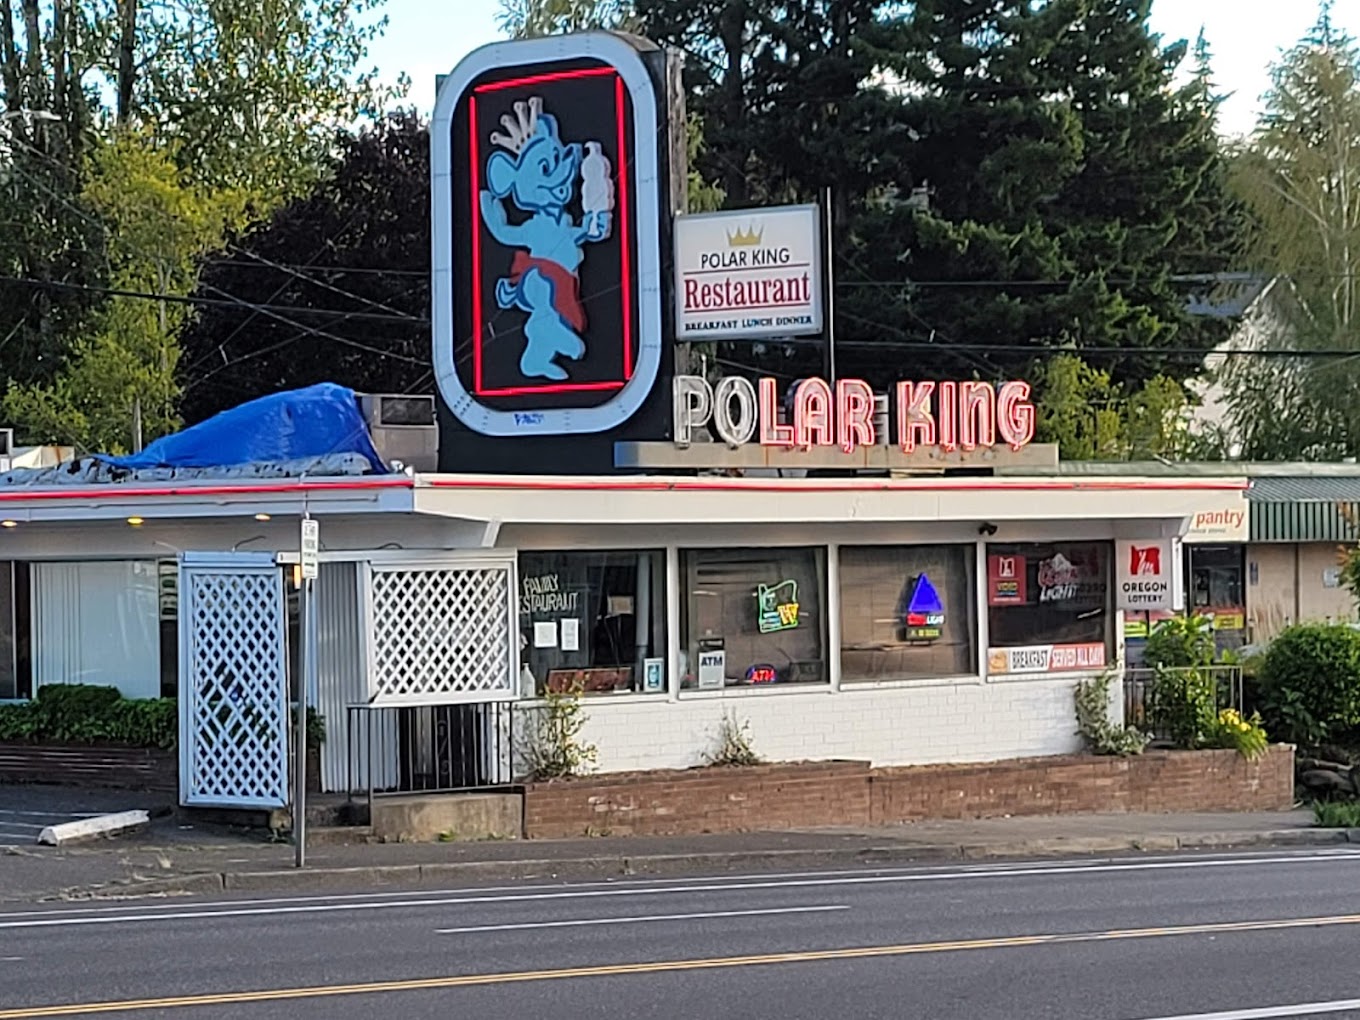 The Polar King Has Been Serving Tasty Homestyle Food For Over 70 Years